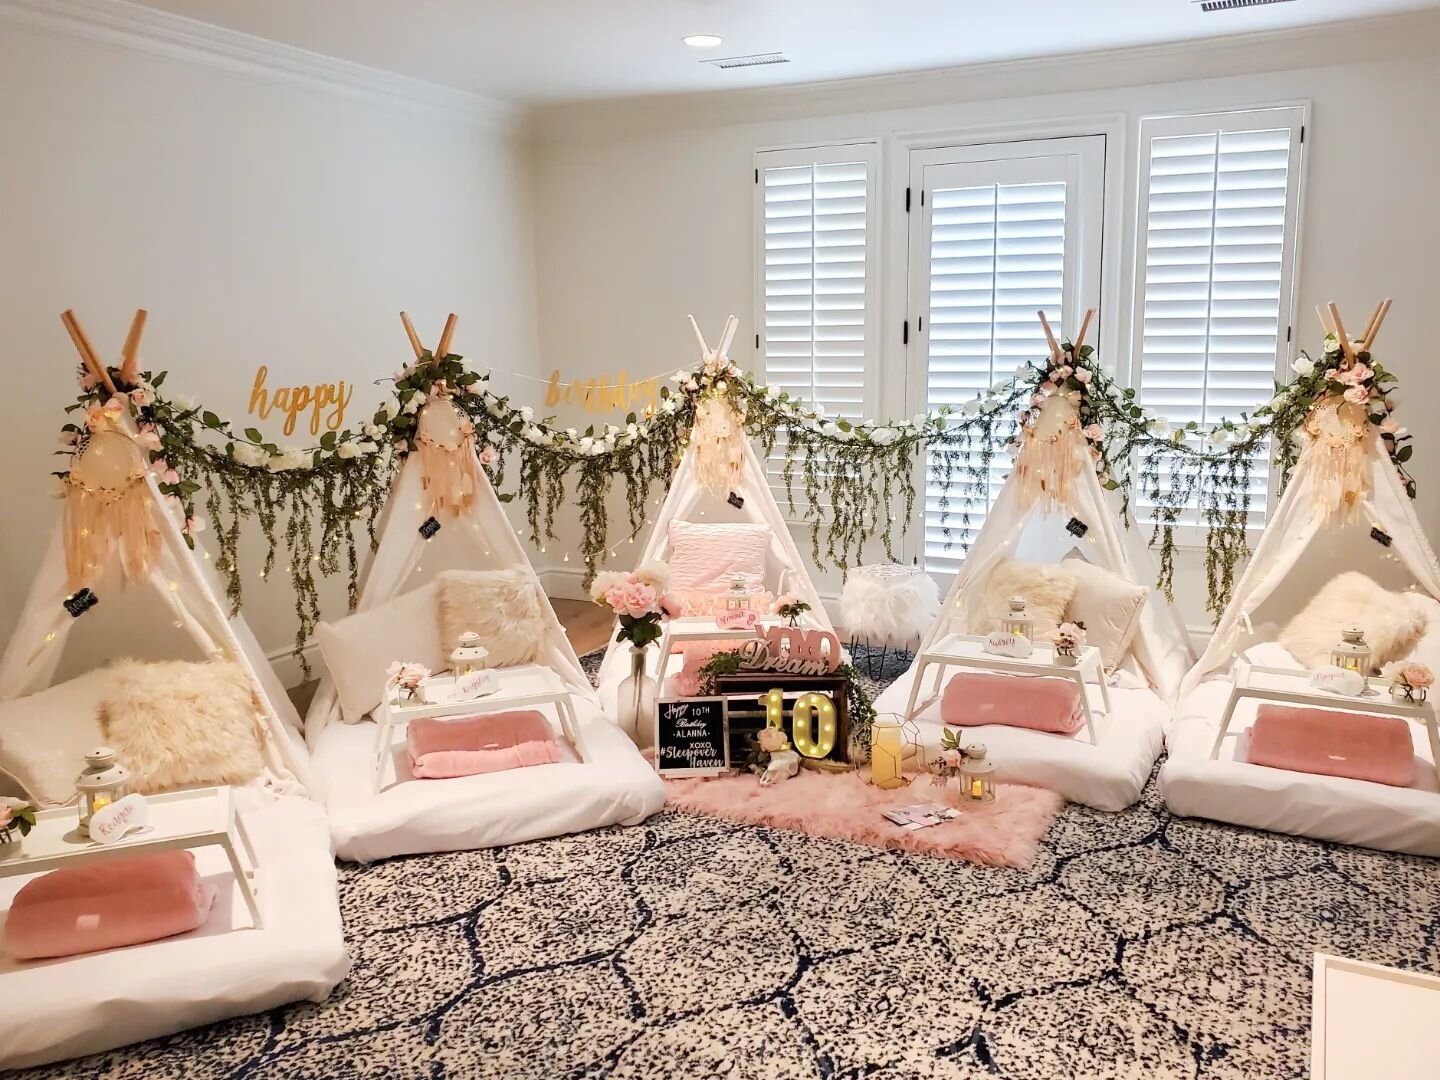 This was Last weekends setup for Alanna ♡ She had a wonderful Sleepover and we were so happy to hear it! 

This is our Boho Chic with a Touch of Pink theme but this mama chose to use the dream catchers in this theme ♡ she also went all out with our L